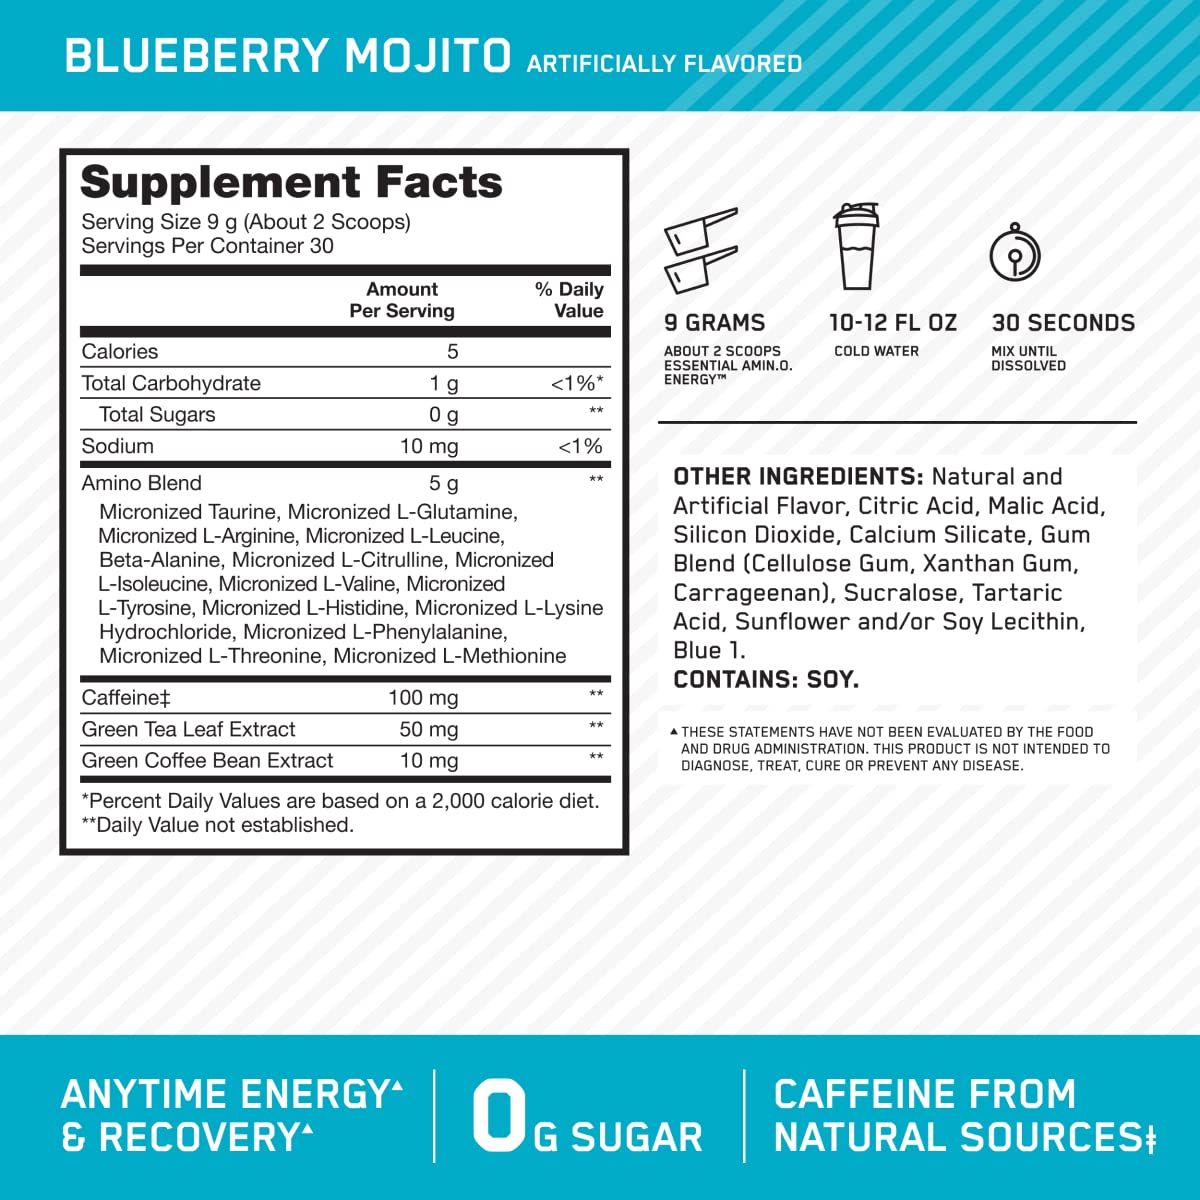 Optimum Nutrition Amino Energy - Pre Workout with Green Tea, BCAA, Amino Acids, Keto Friendly, Green Coffee Extract, Energy Powder - Blueberry Mojito, 30 Servings (Packaging May Vary)